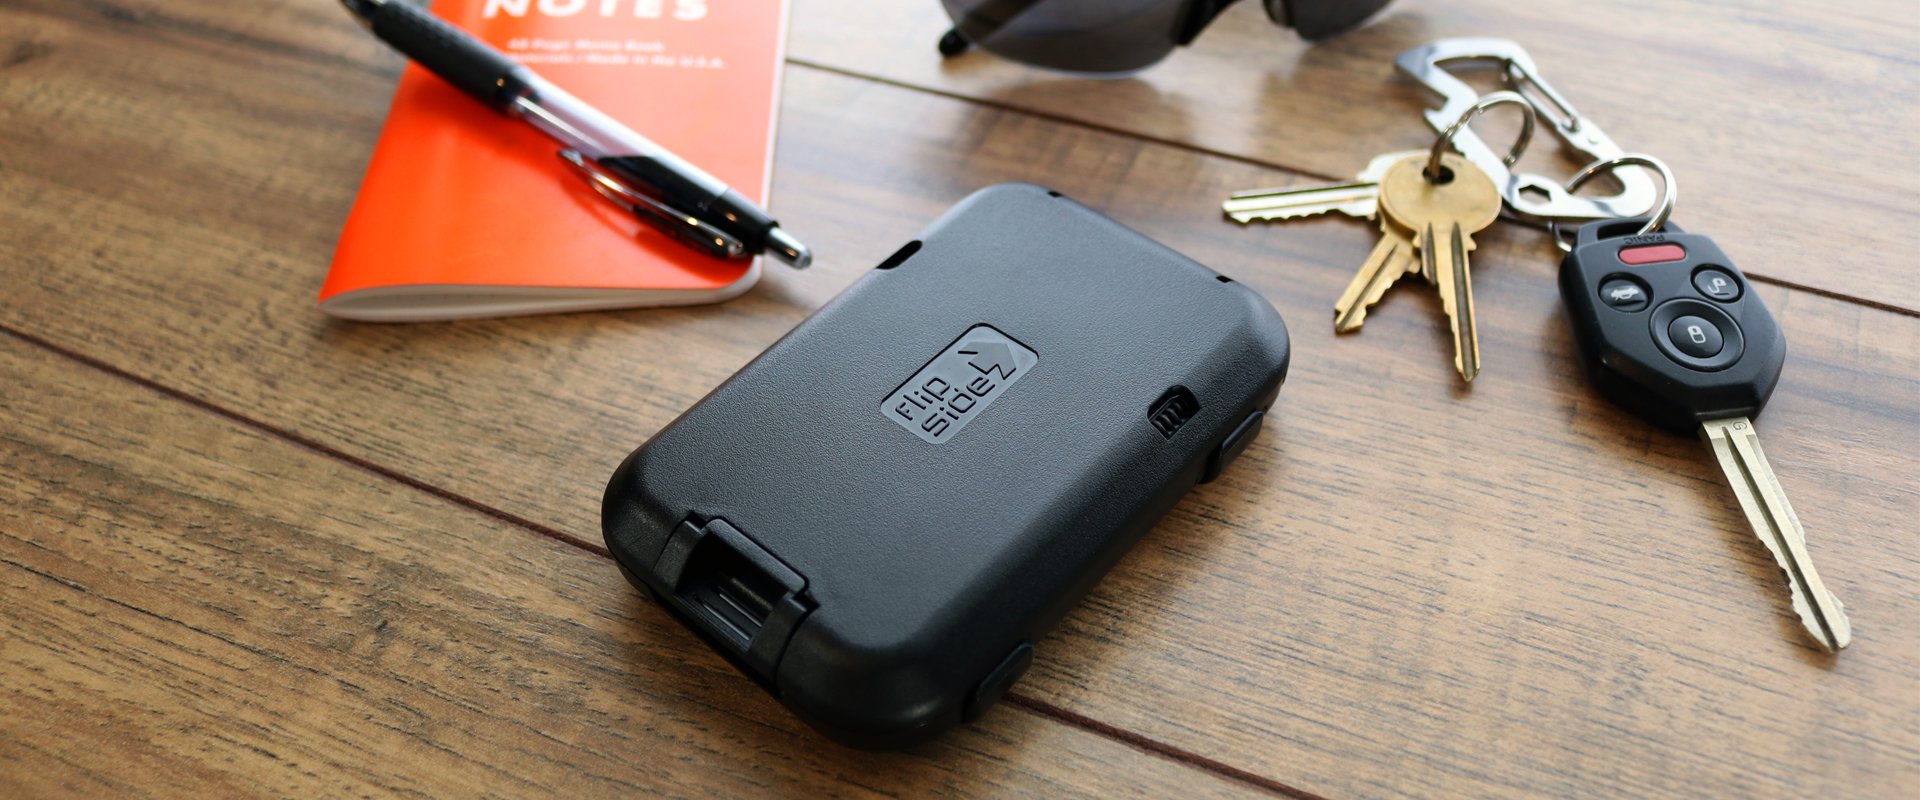 The flipside rfid wallet is also a crush resistant hardcase wallet that protects your cards from damage